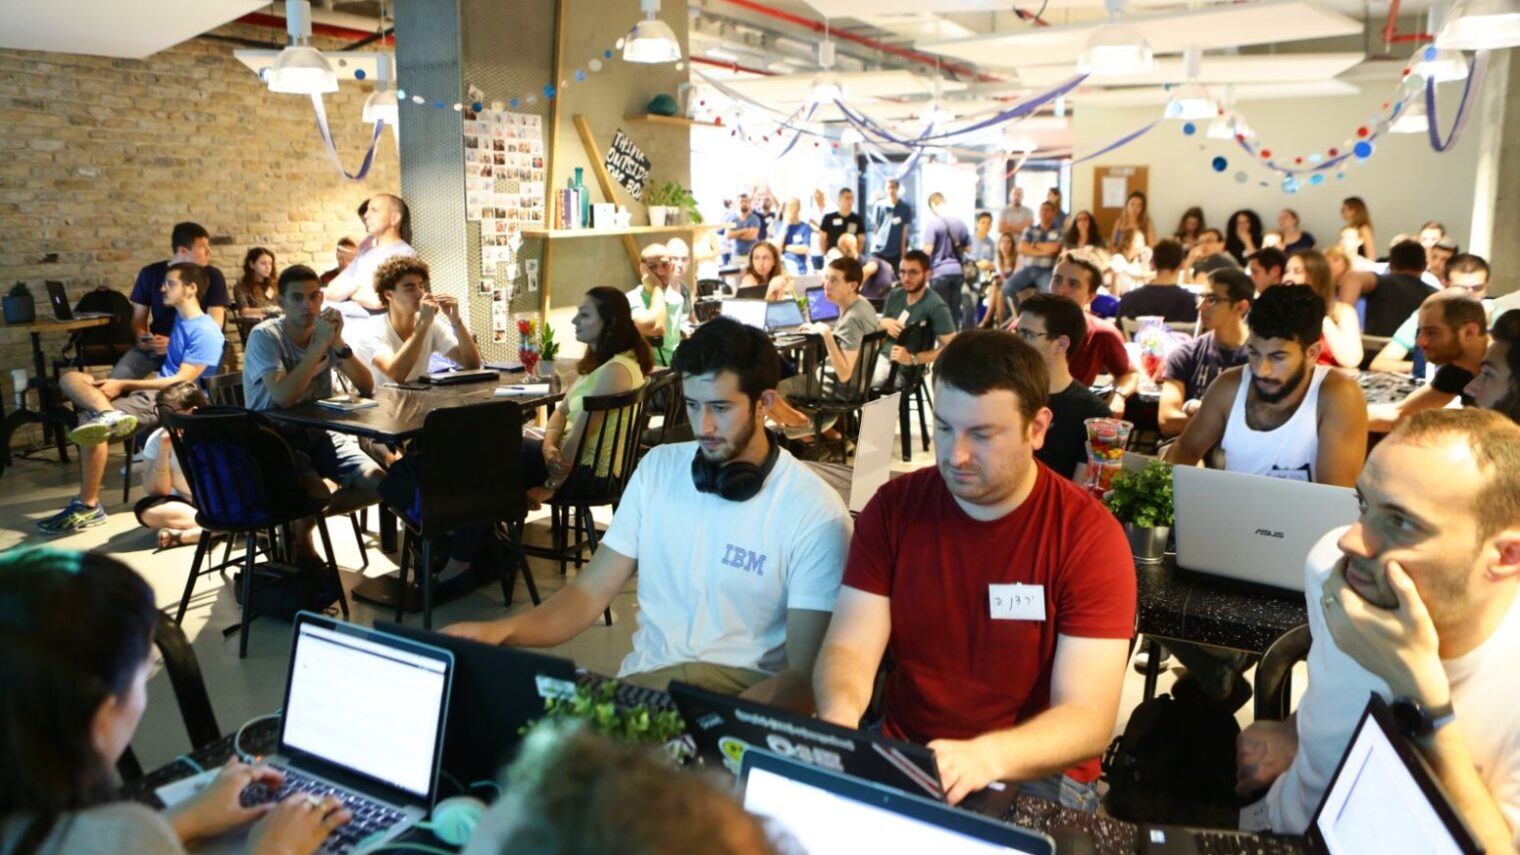 Hackers from the Ofek unit of the Air Force to design apps to solve challenges of people on the autism spectrum. Photo courtesy of ALUT